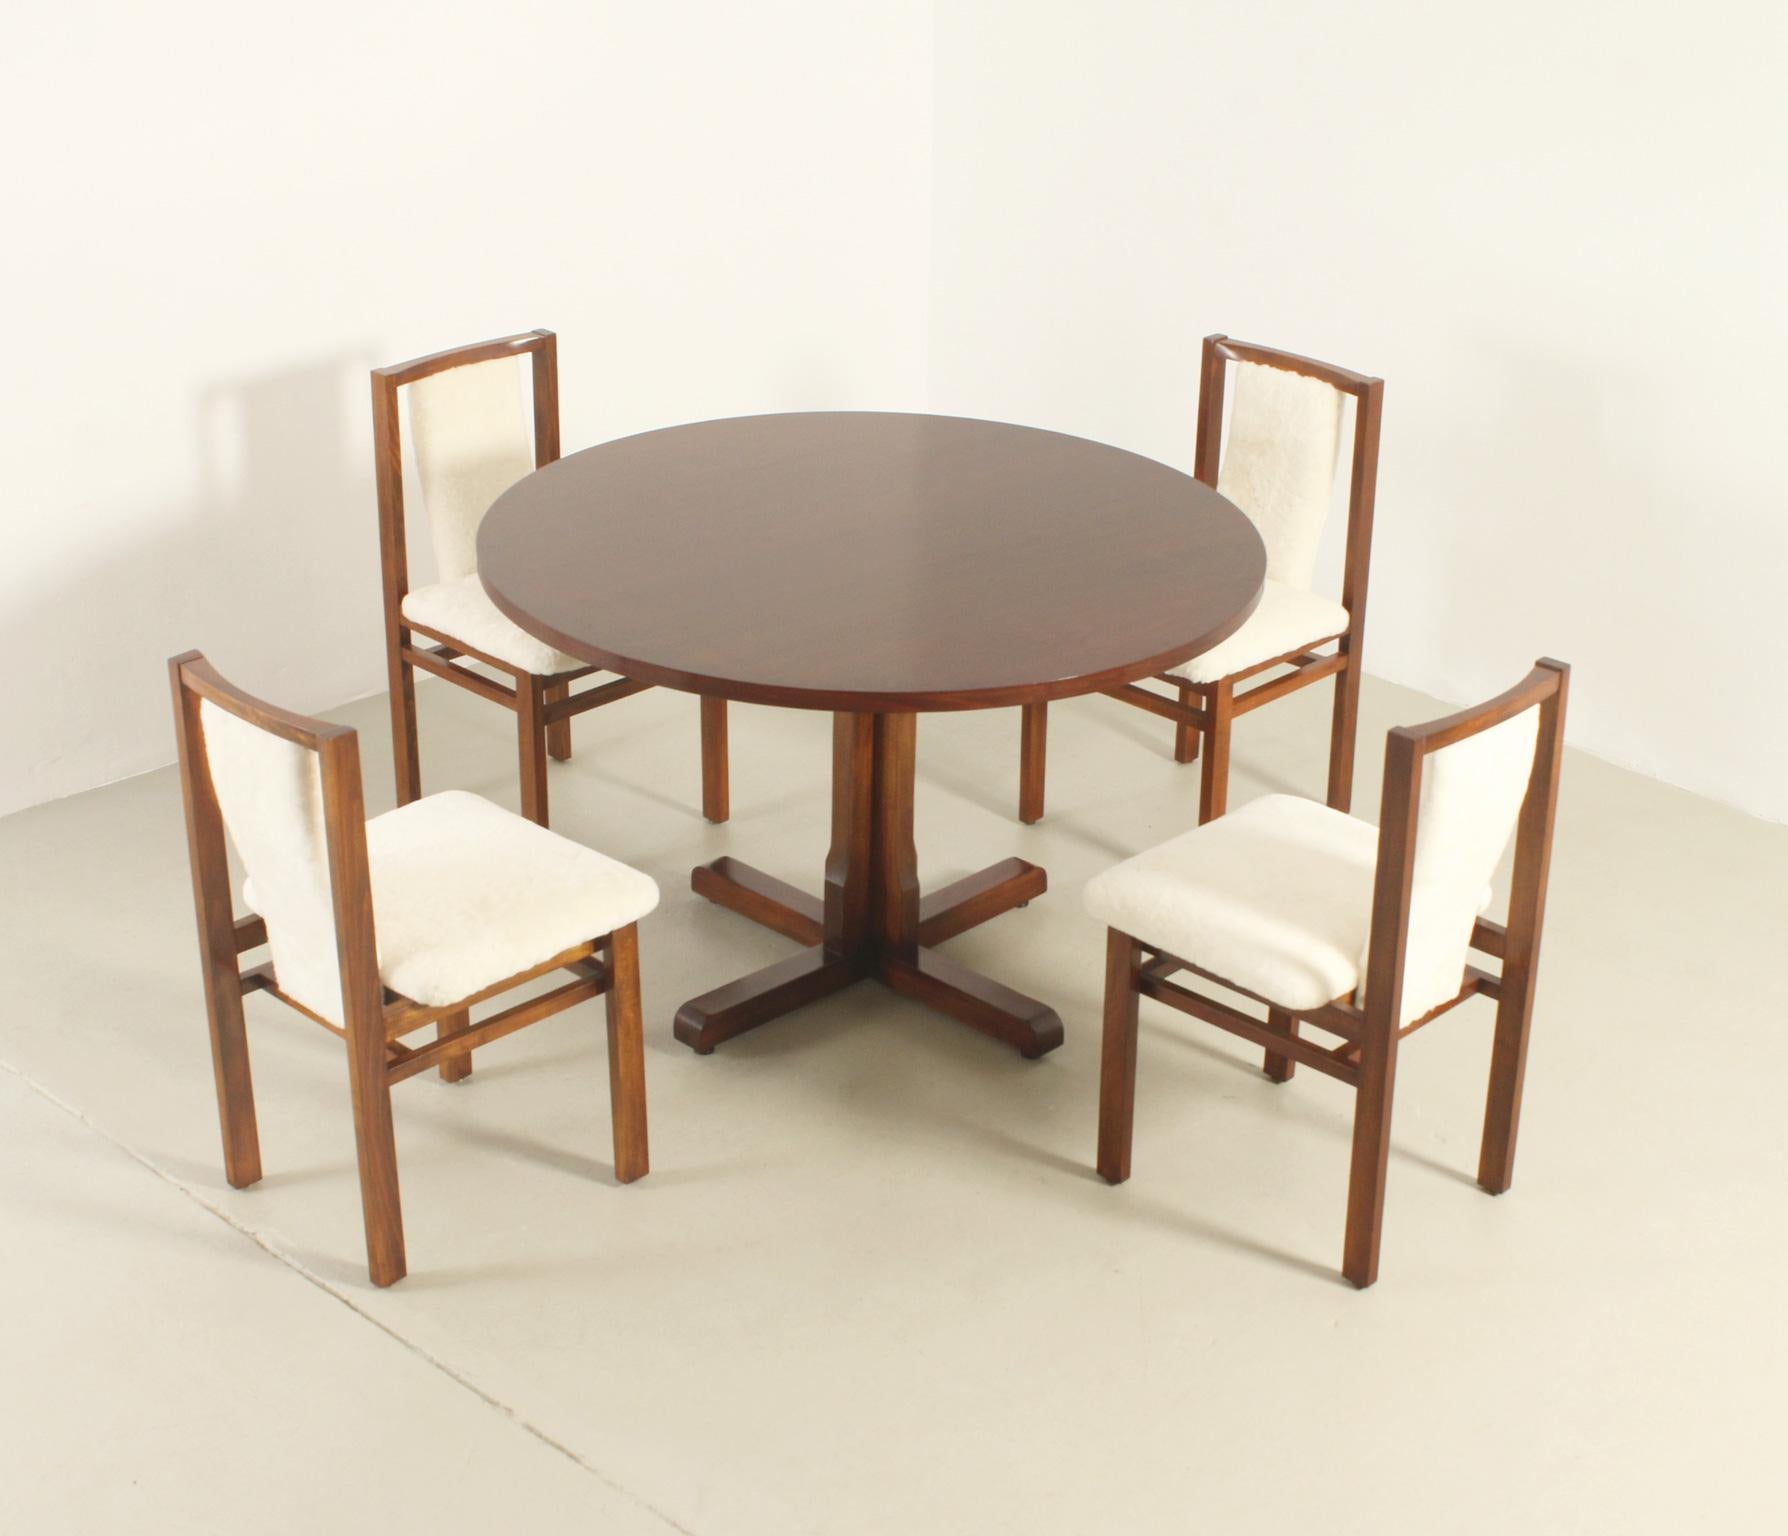 Four Dining Chairs by Jordi Vilanova in Oak Wood and Sheepskin, Spain, 1960's For Sale 9